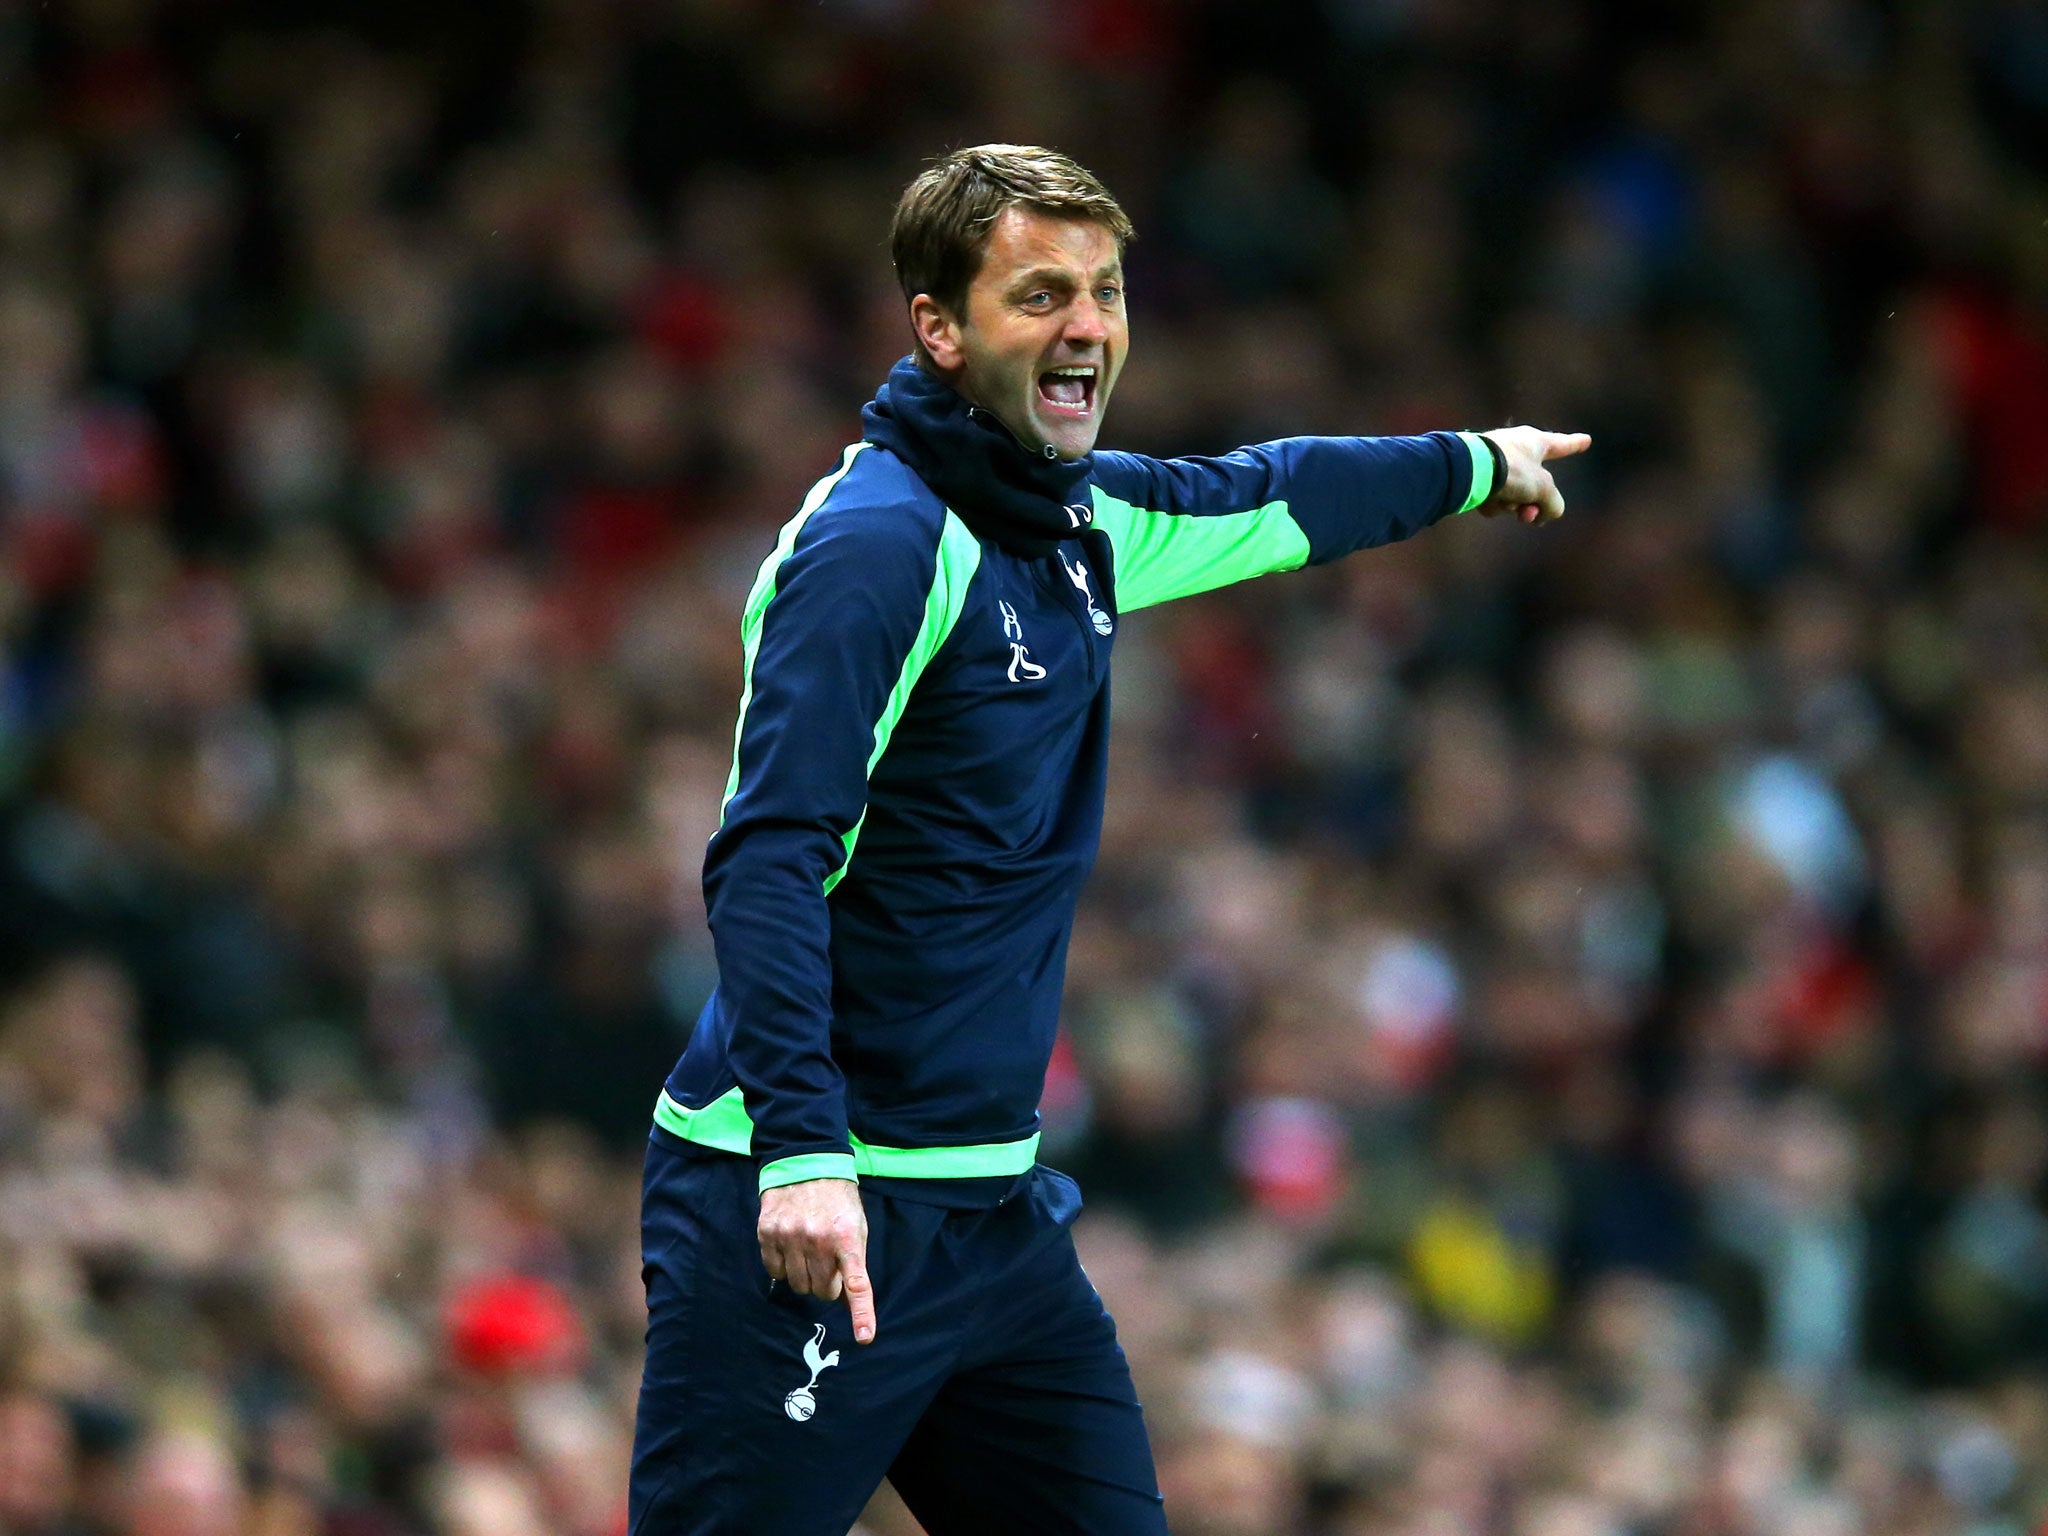 Tottenham manager Tim Sherwood gestures from the sidelines during his side's 2-0 defeat to Arsenal in the FA Cup third round